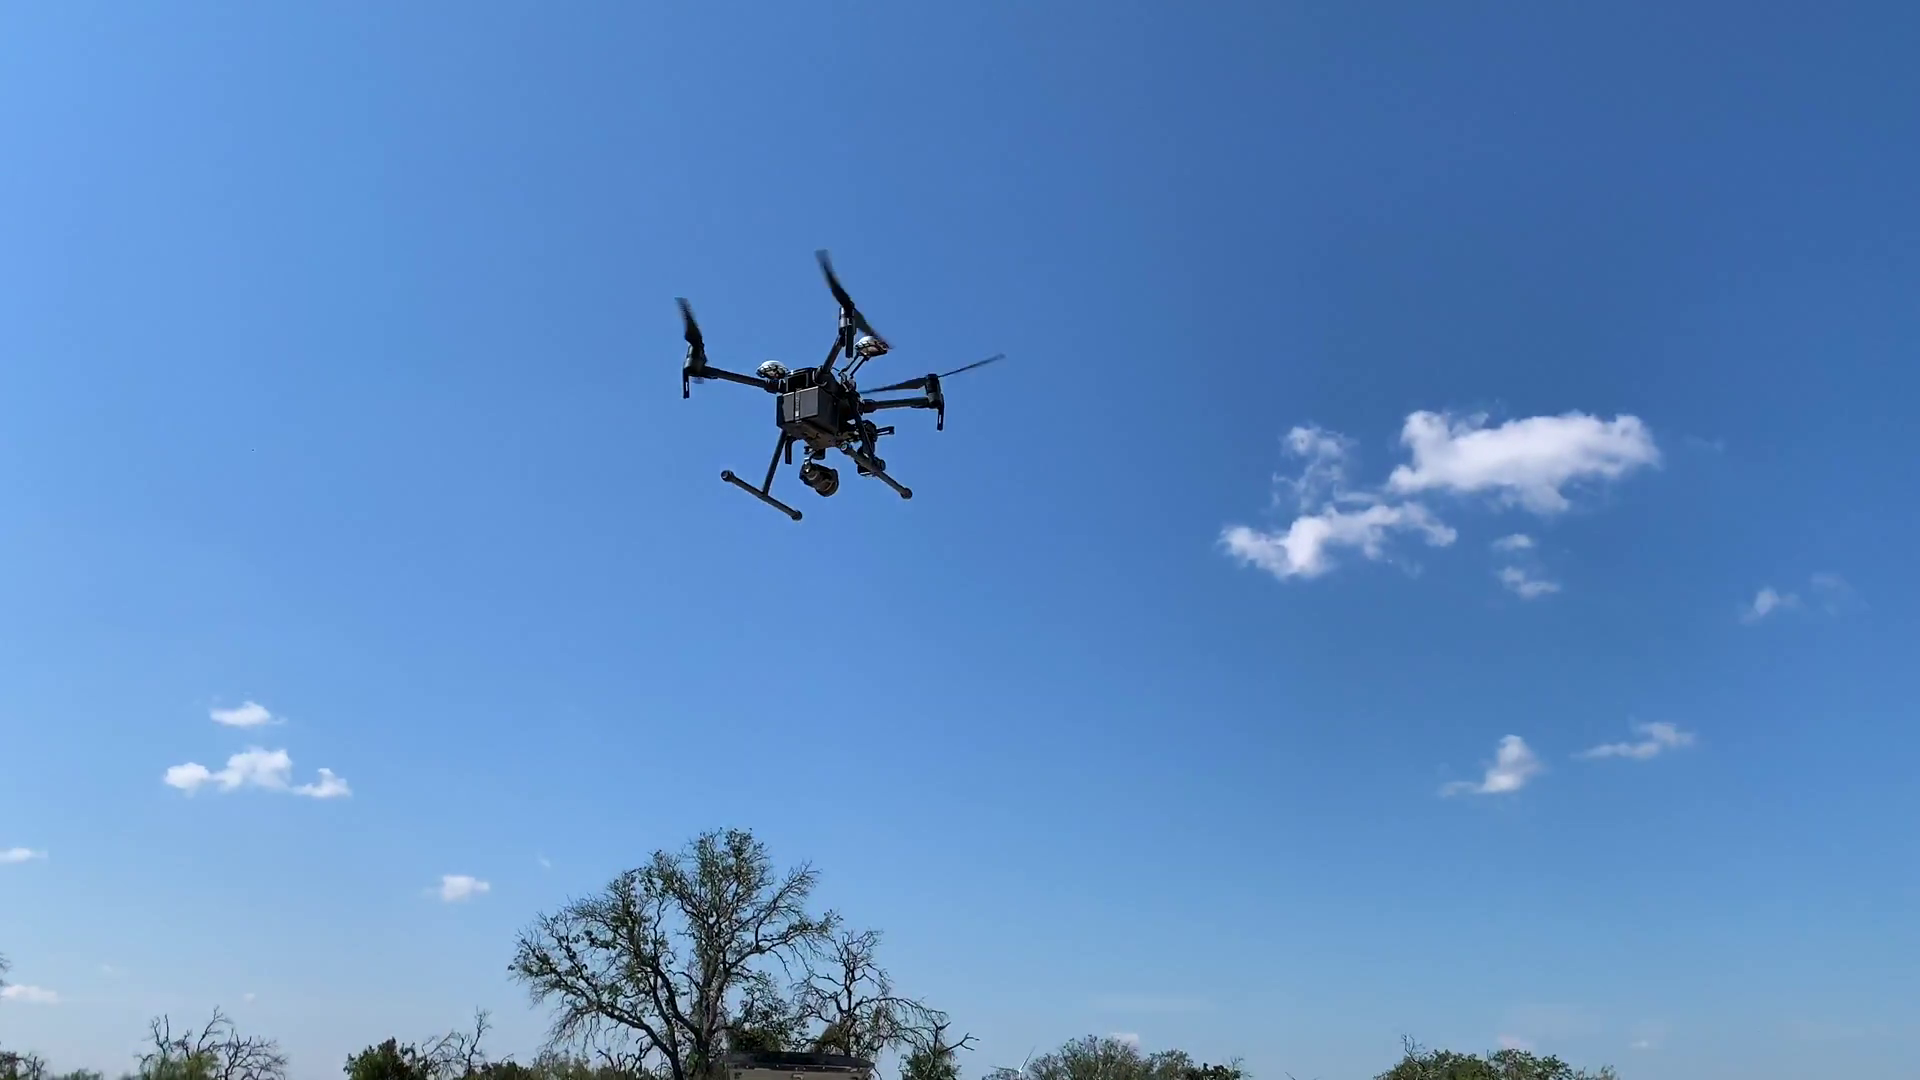 A black drone is flying in a blue sky with white clouds inspecting a wind turbine.